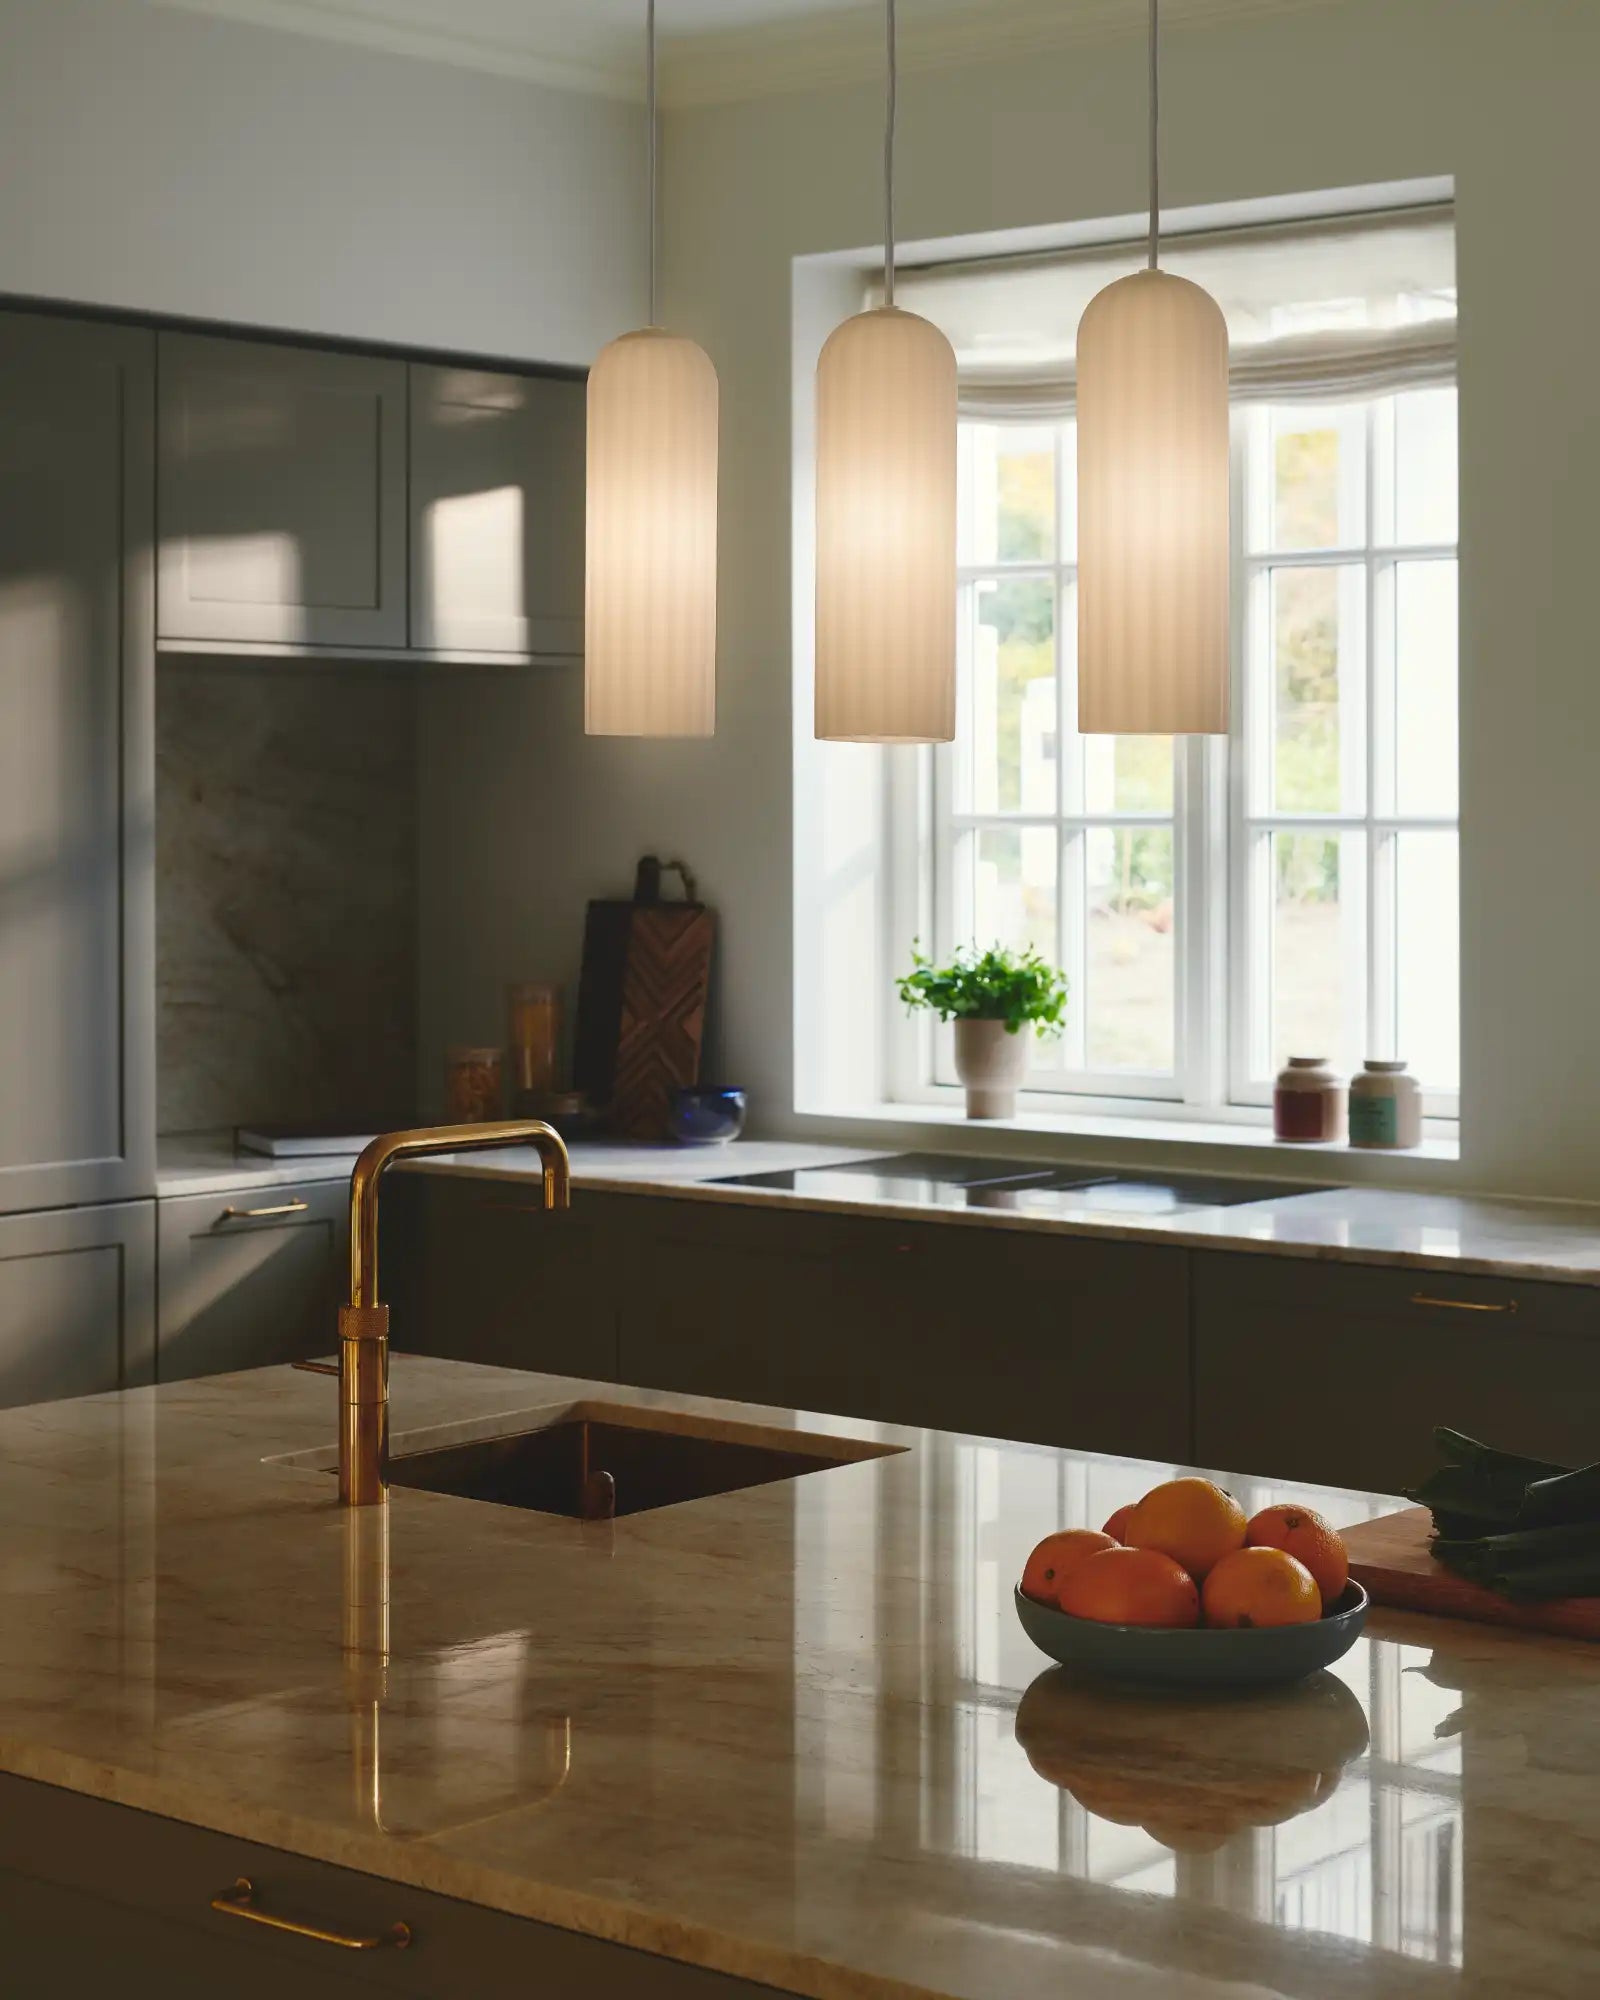 Miella 3lt Pendant Light by Nordlux Lighting featured within a contemporary kitchen nook | Nook Collections